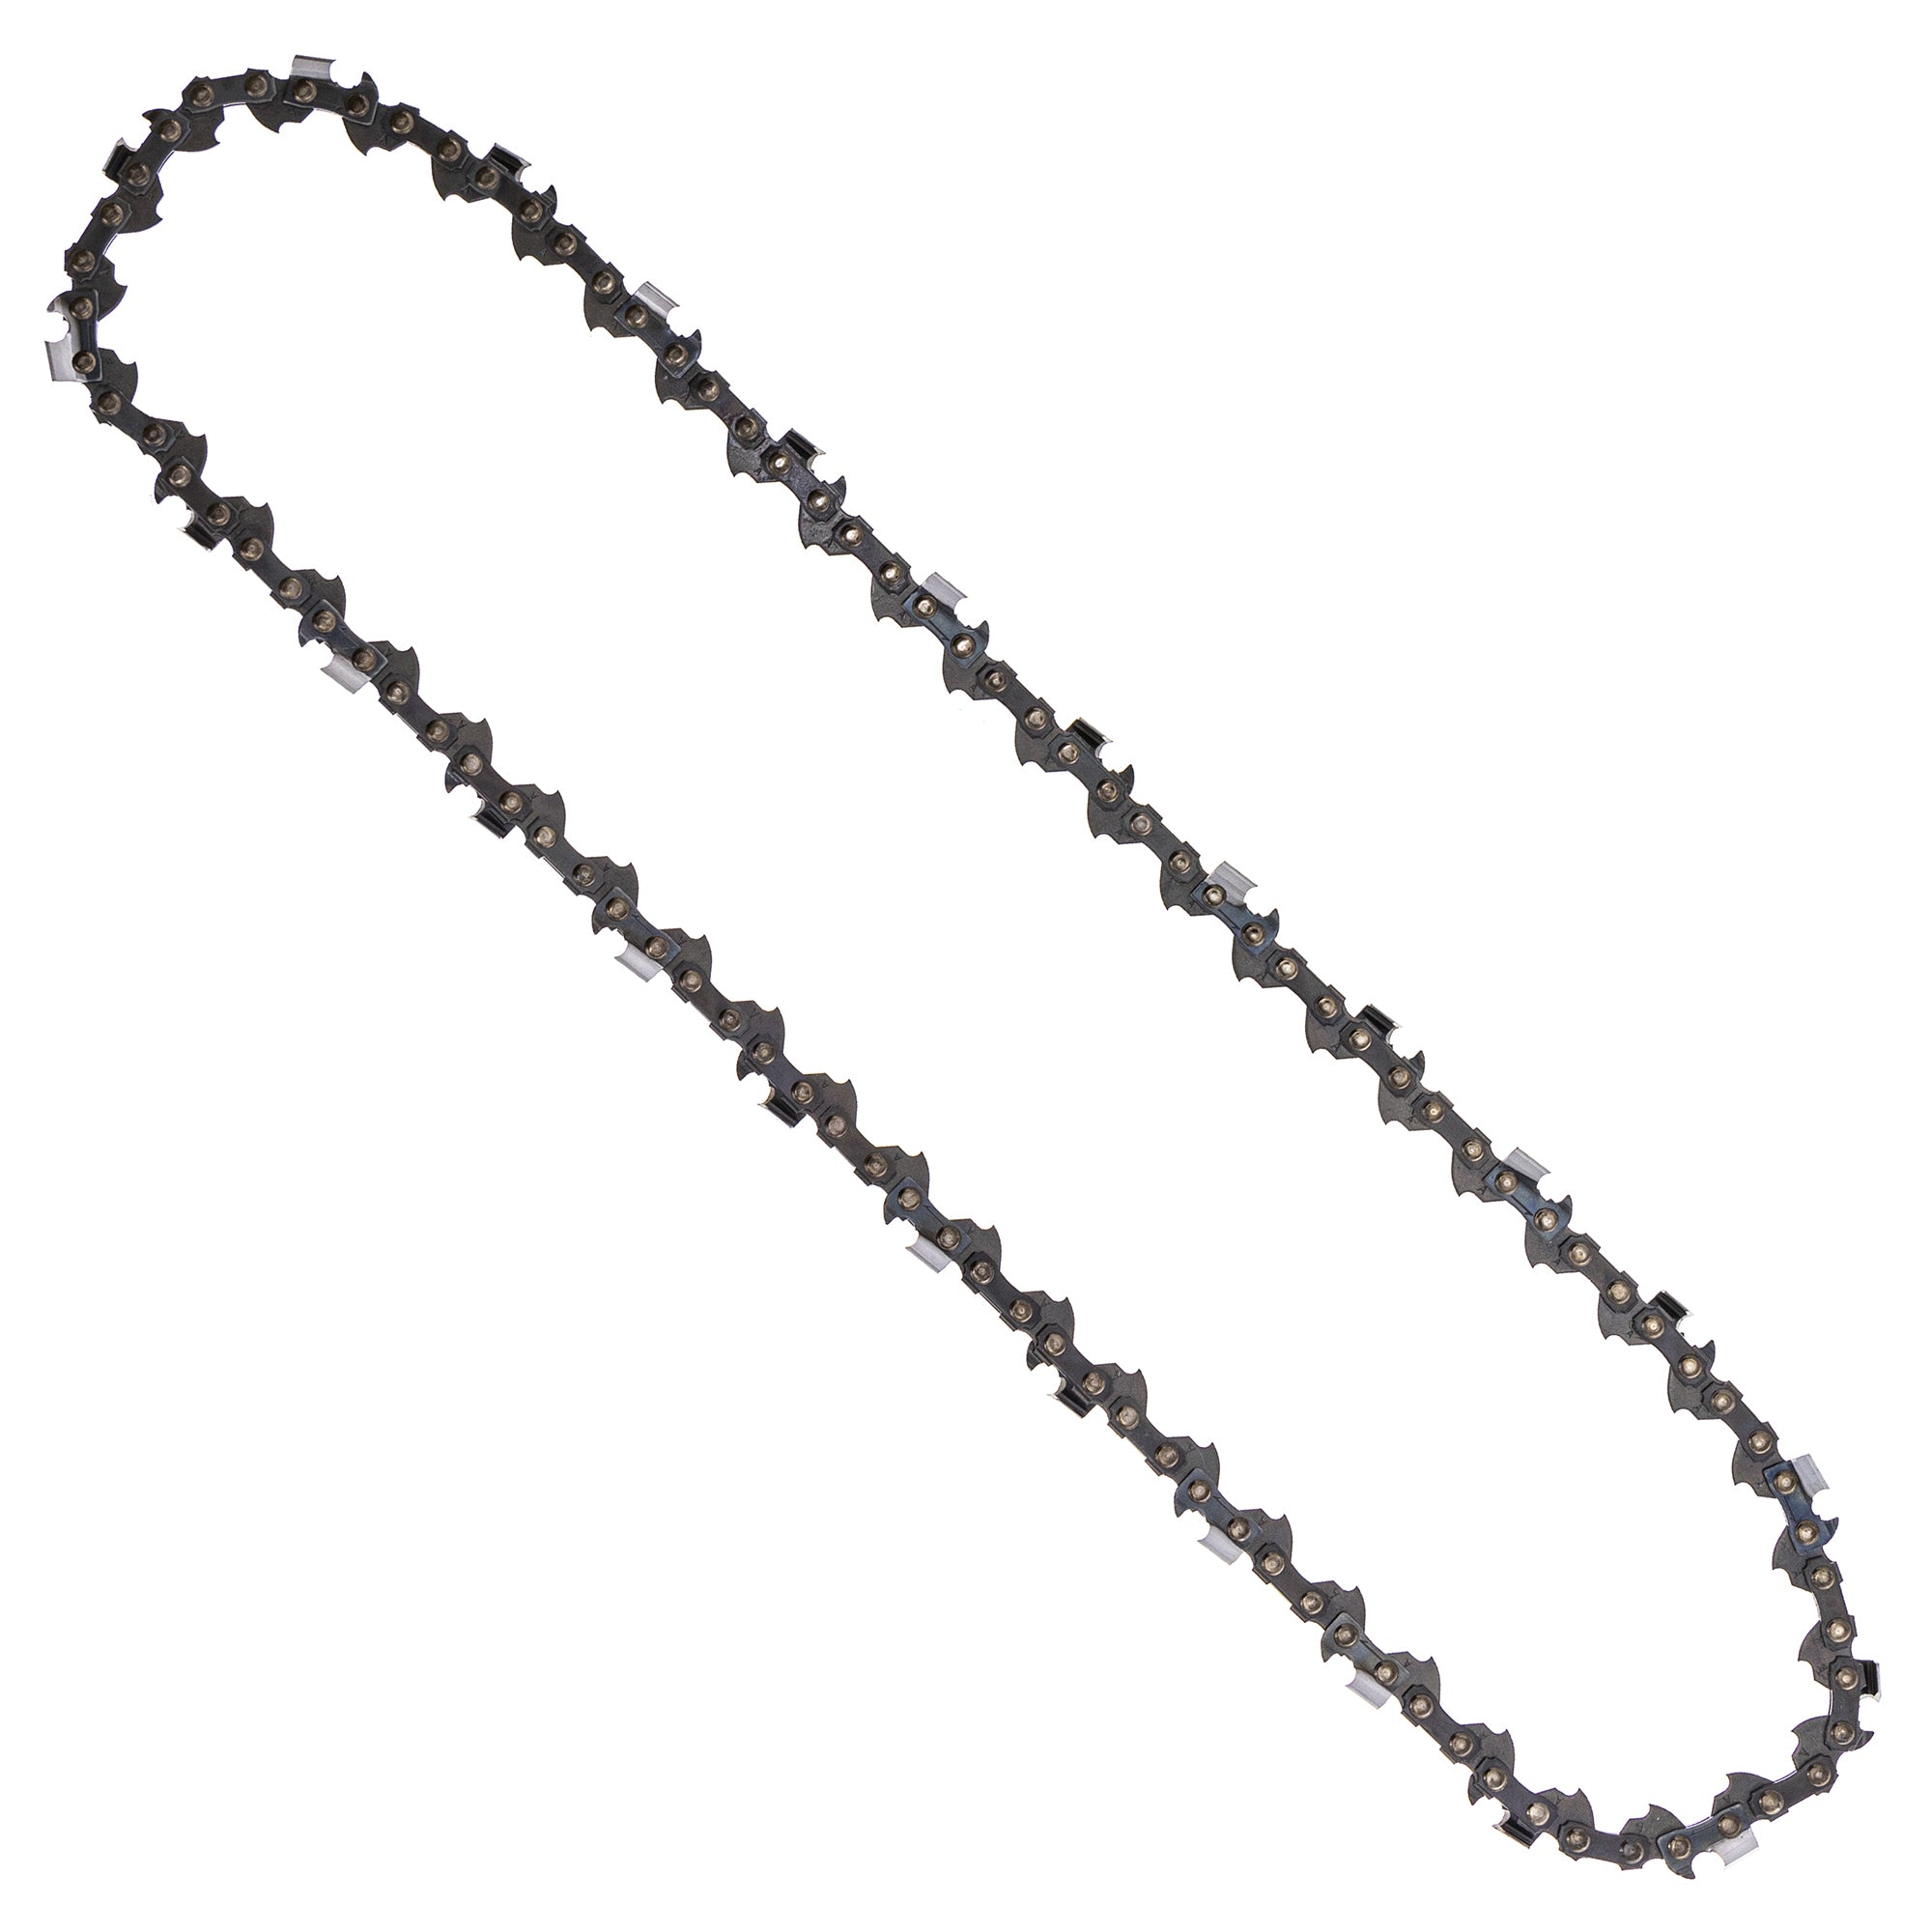 8TEN 810-CCC2234H Chain 3-Pack for zOTHER Stens Oregon Husqvarna